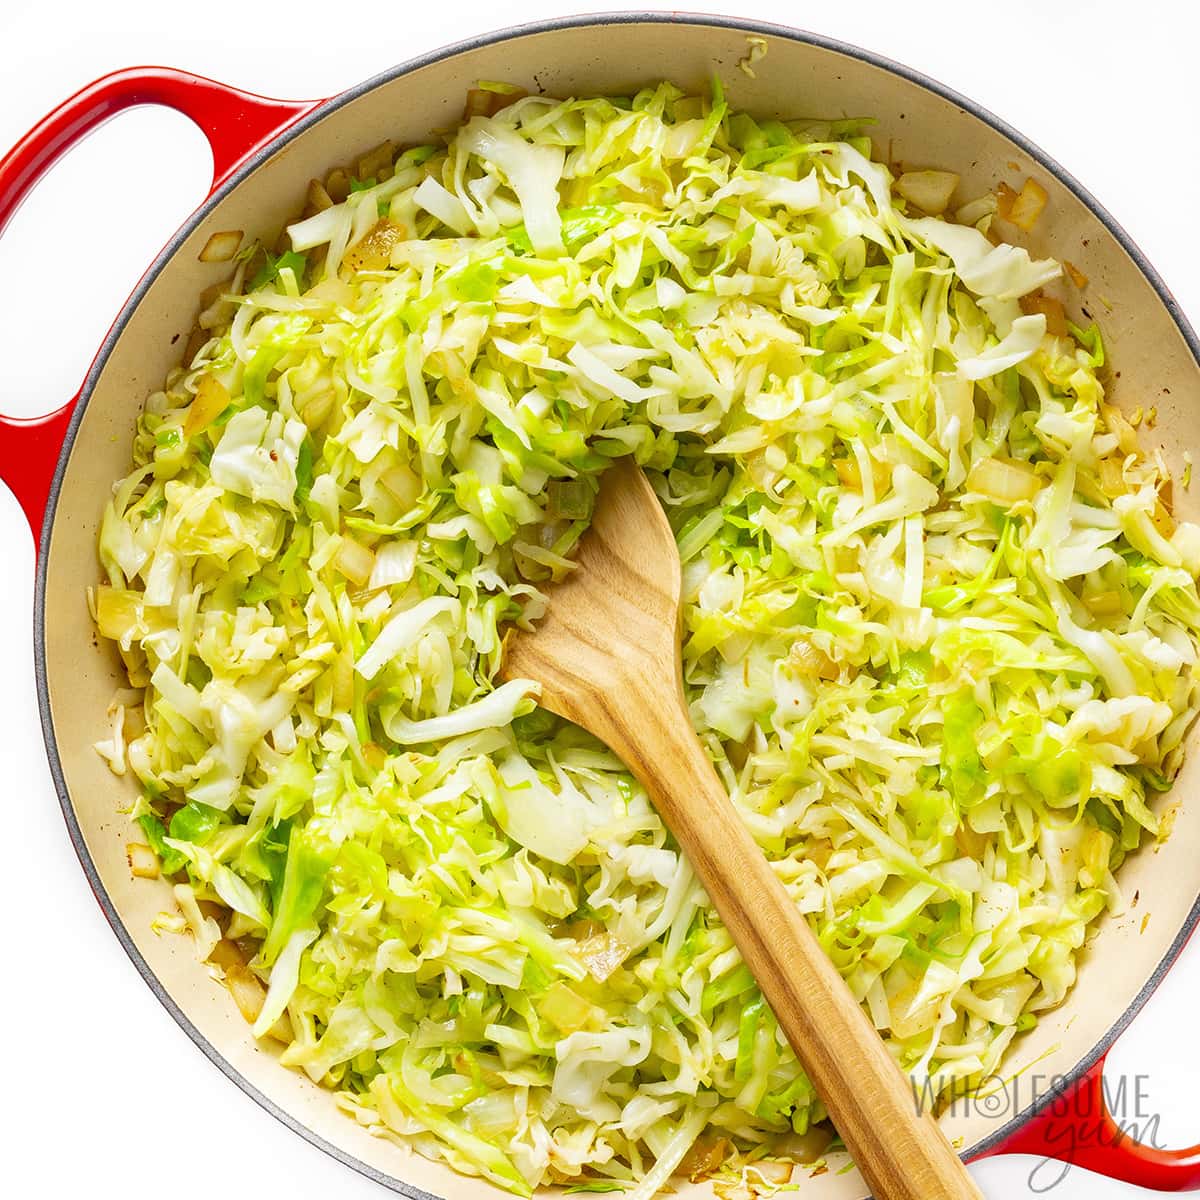 Cabbage added to the pan.